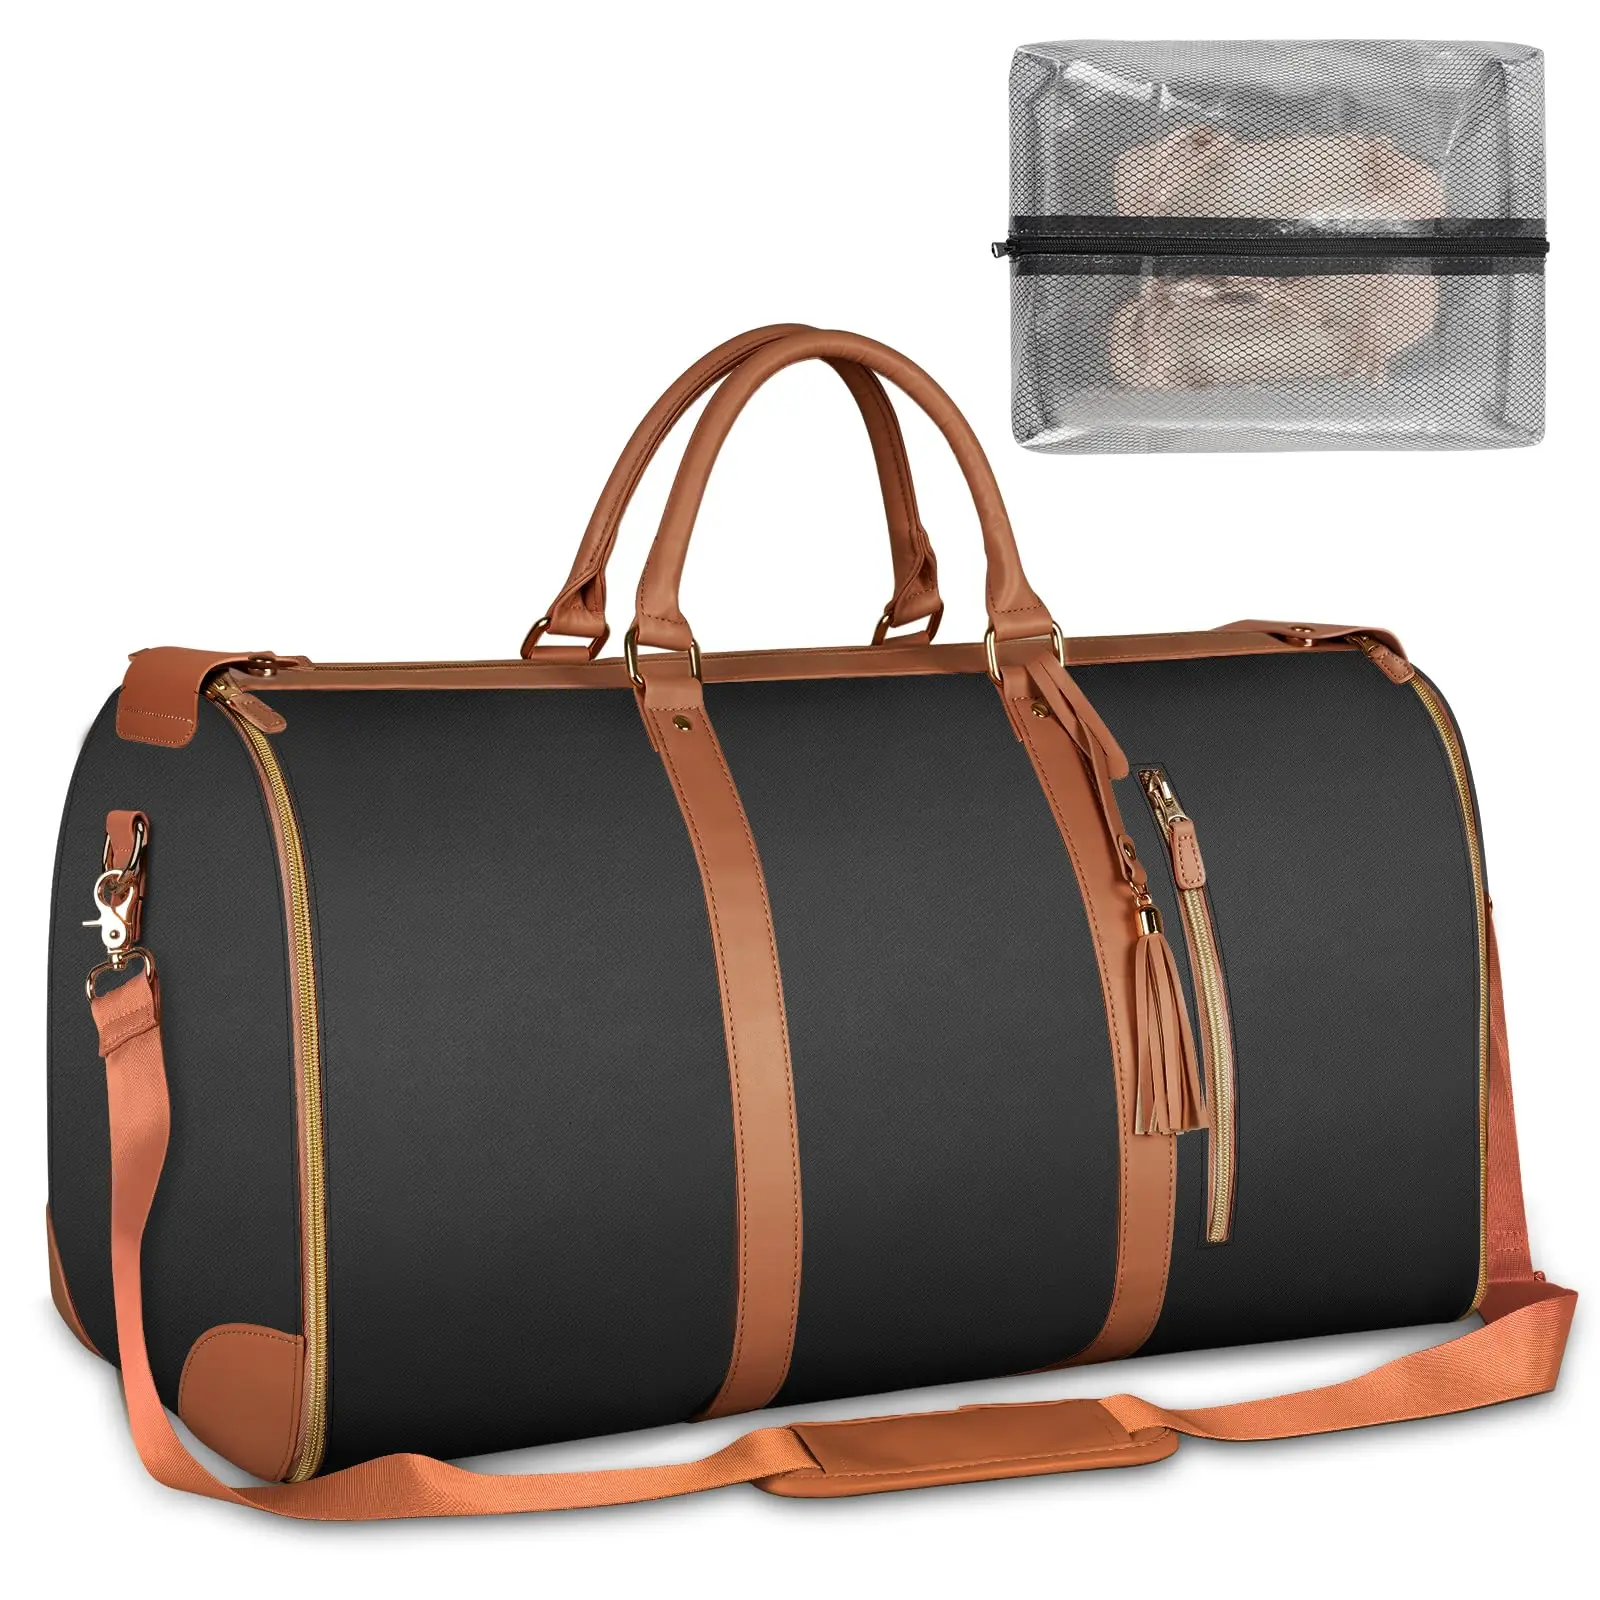 

Convertible Garment Bag: Large Carry-On Weekend Duffle with Shoe Compartment. 2-in-1 Hanging Suitcase Set - Ideal Women's Gift